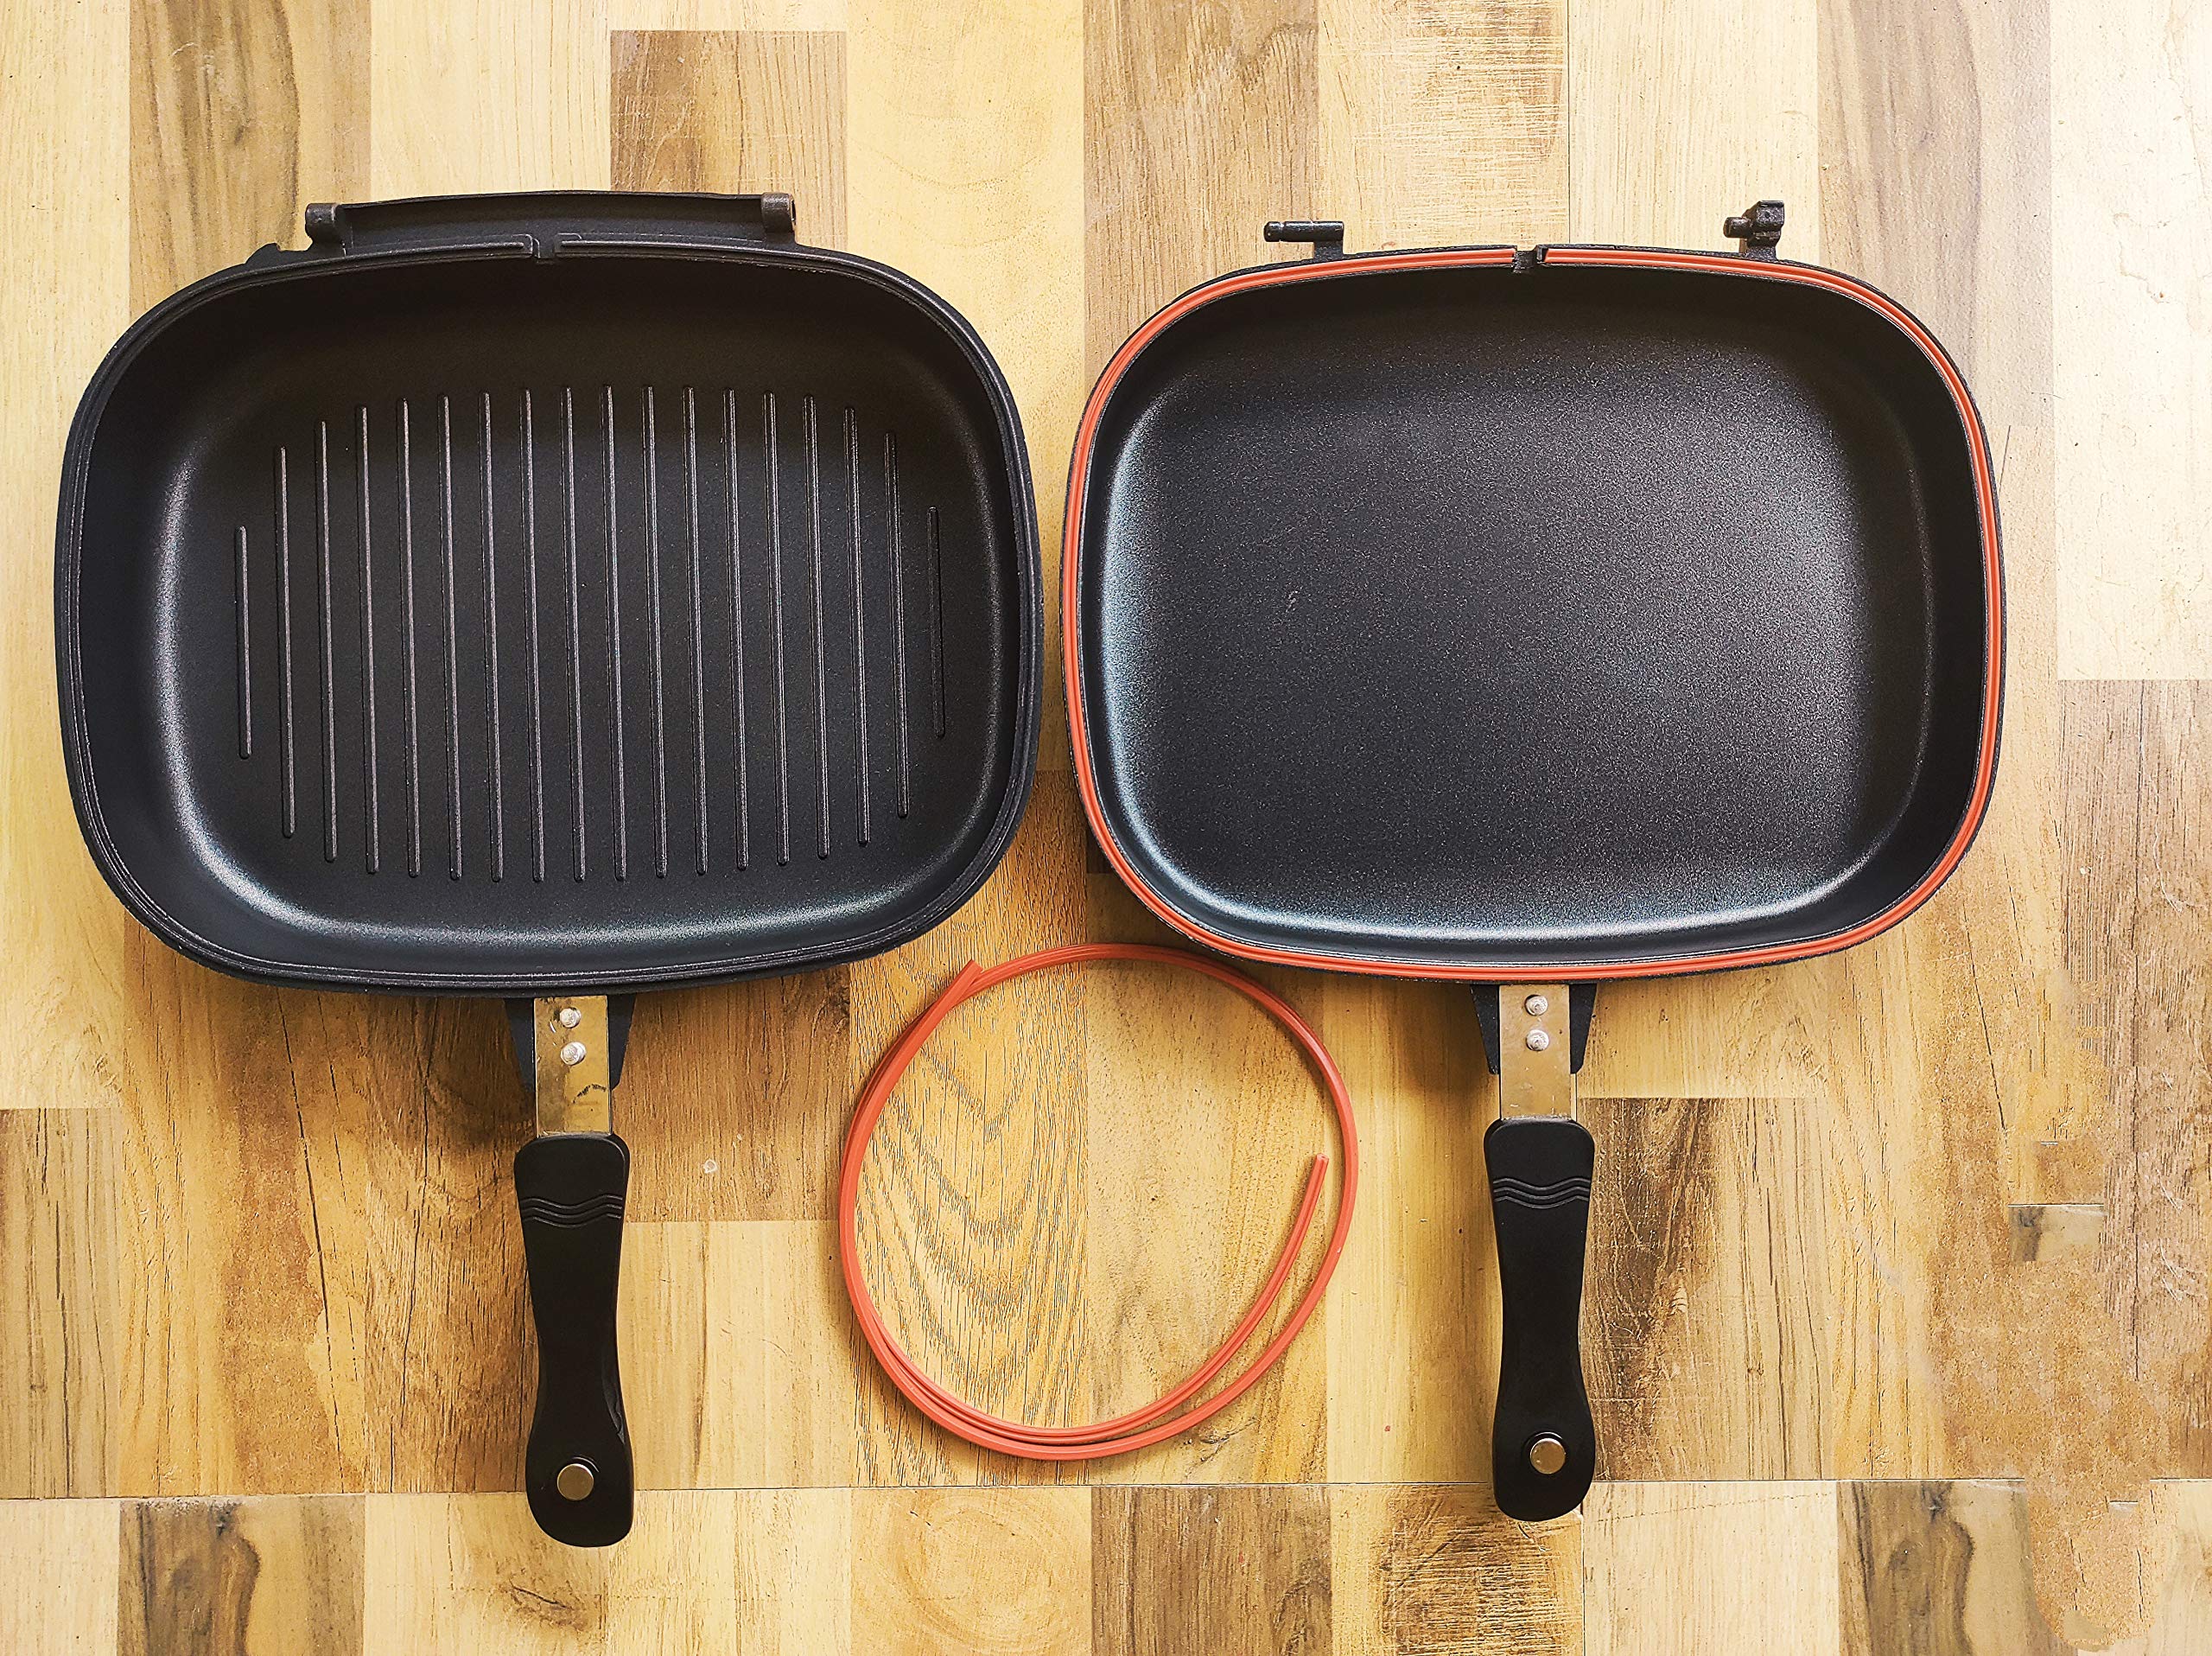 Grill Pan Magic: Elevate Your Cooking with Juicy, Flavorful Recipes